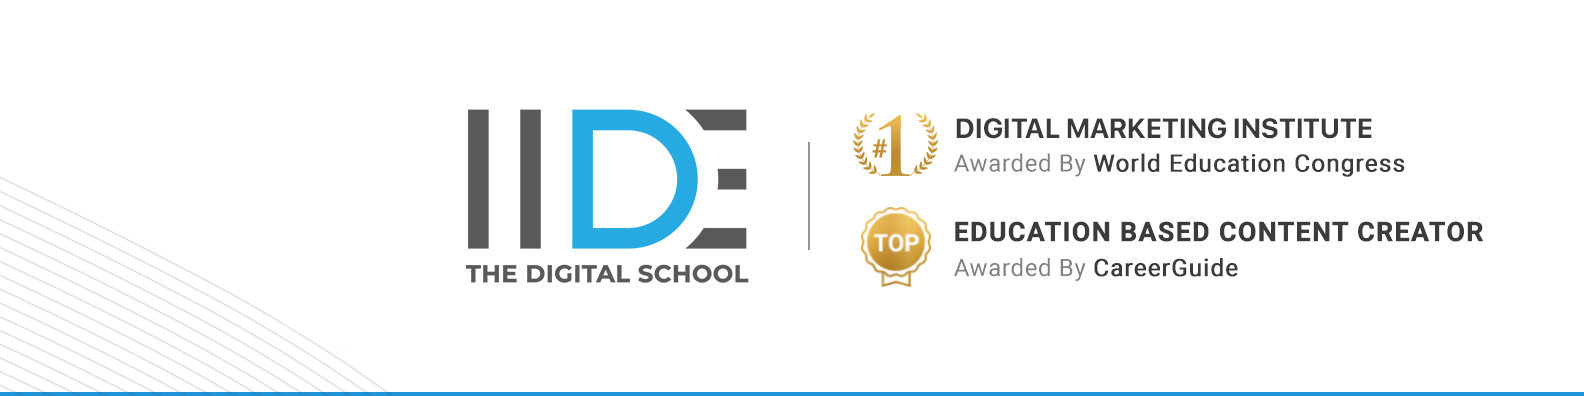 Top 11 Digital Marketing Certifications That are Worth the Money 1